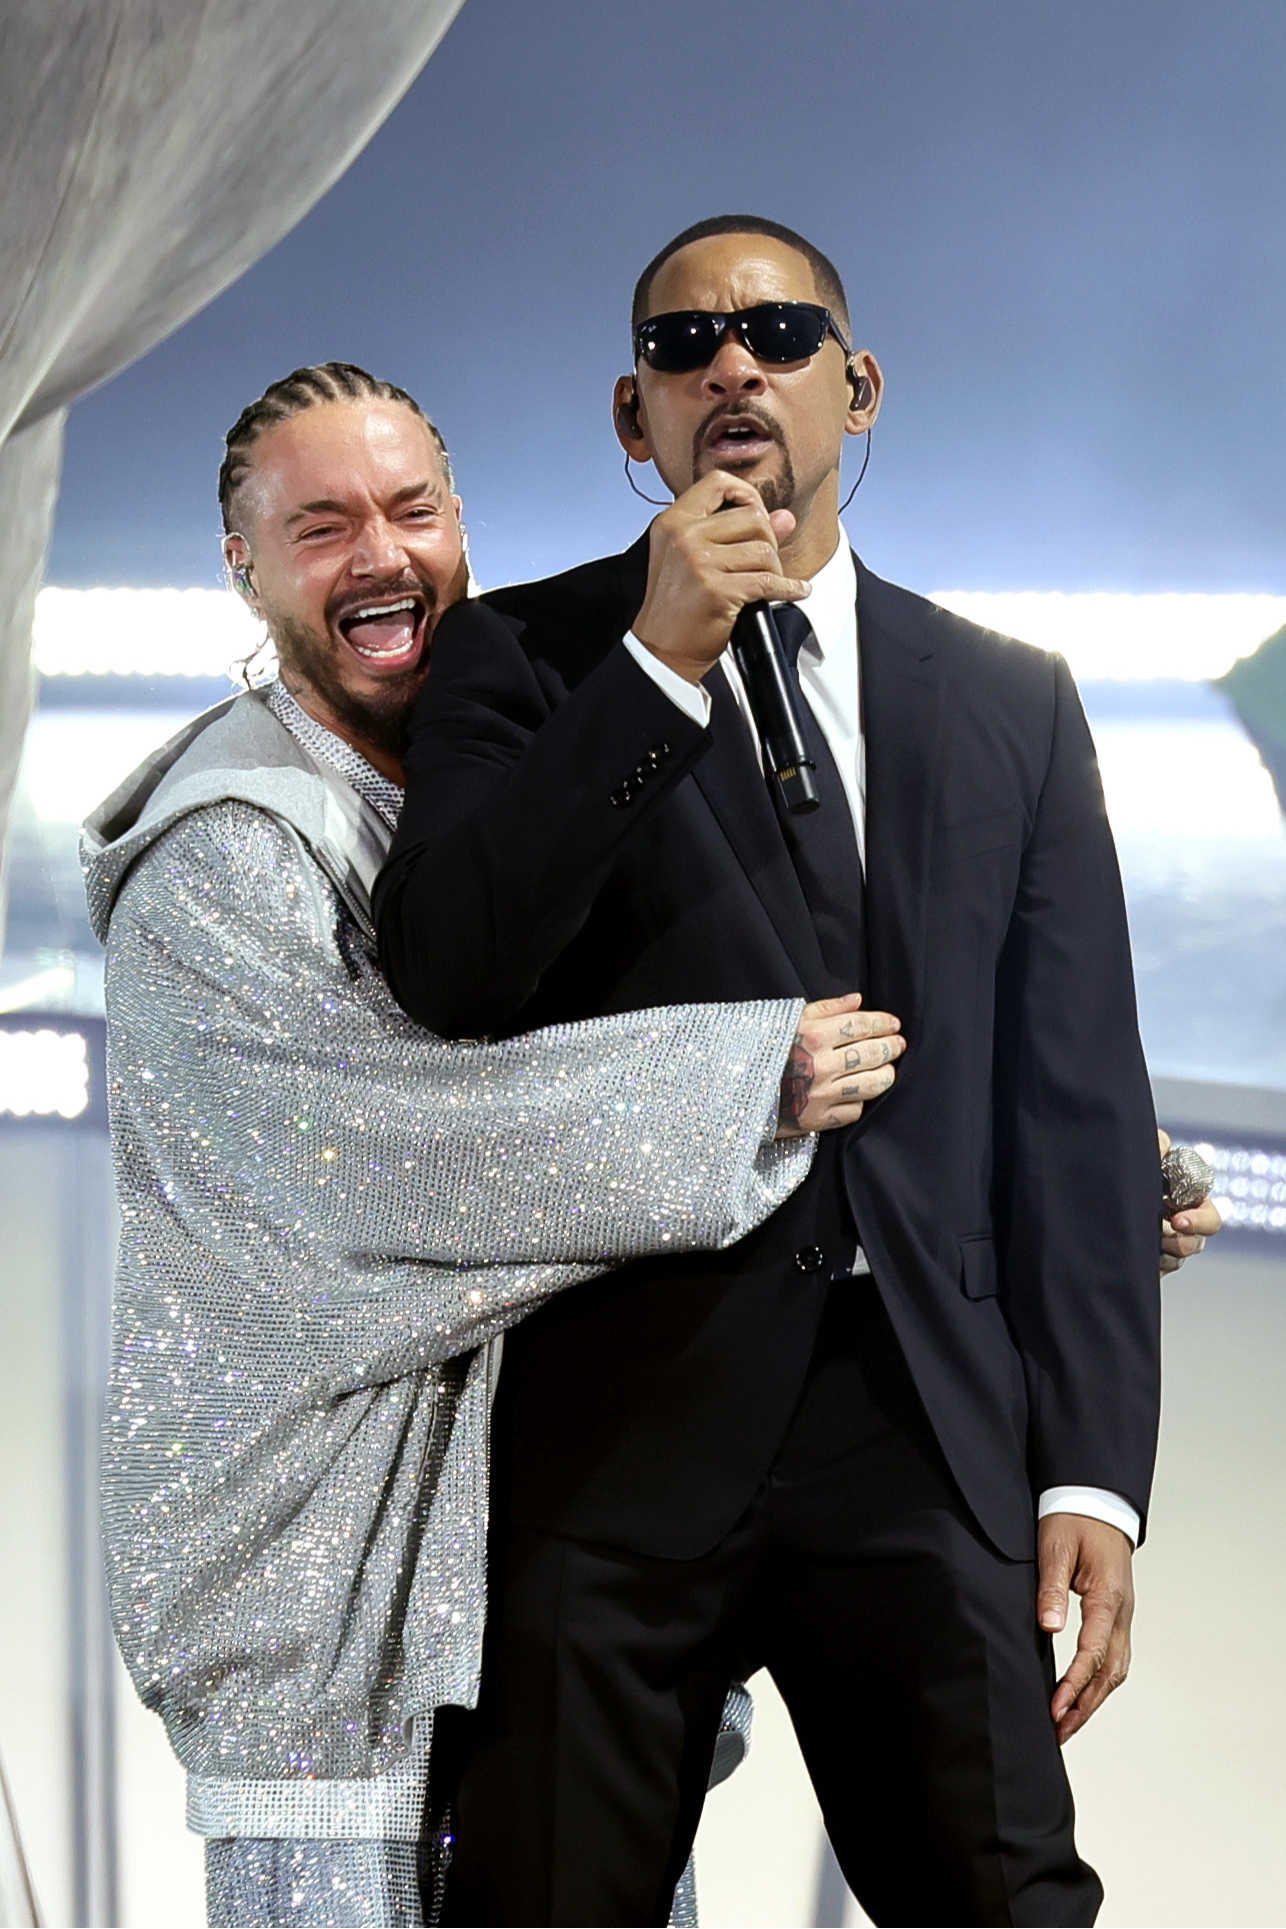 will smith brings men in black back to the stage at coachella